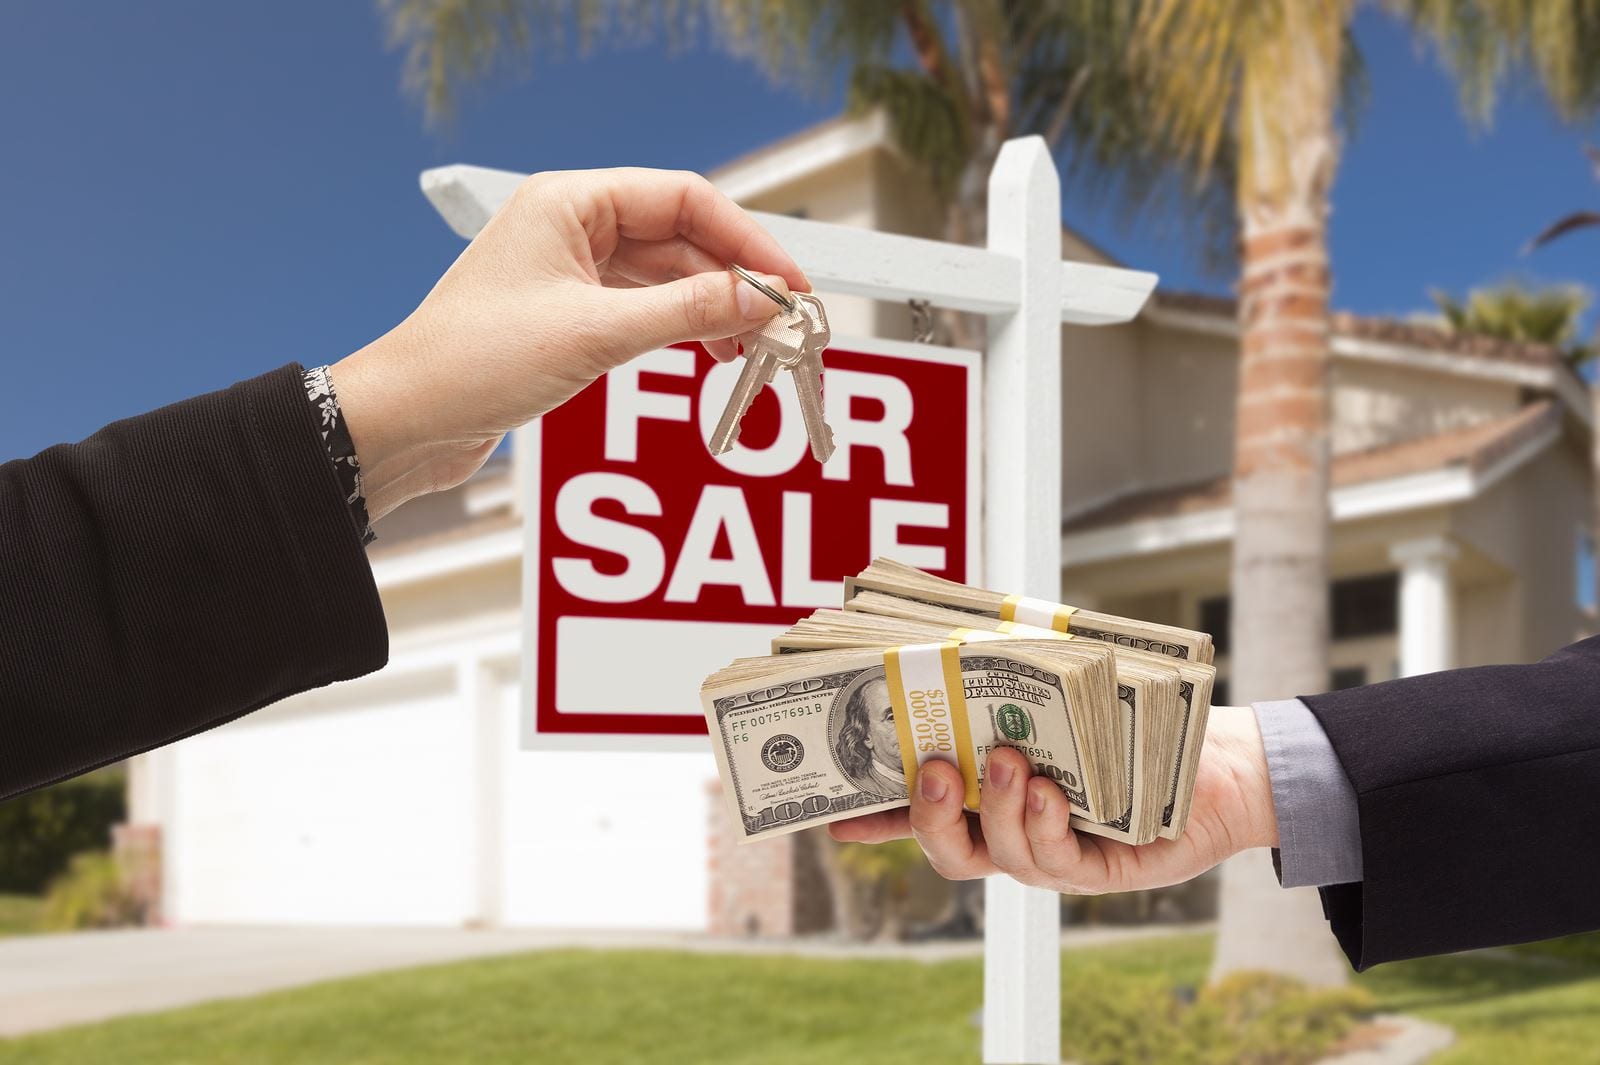 Home Seller Beware - How To Avoid Fast Cash House Buyer Scam